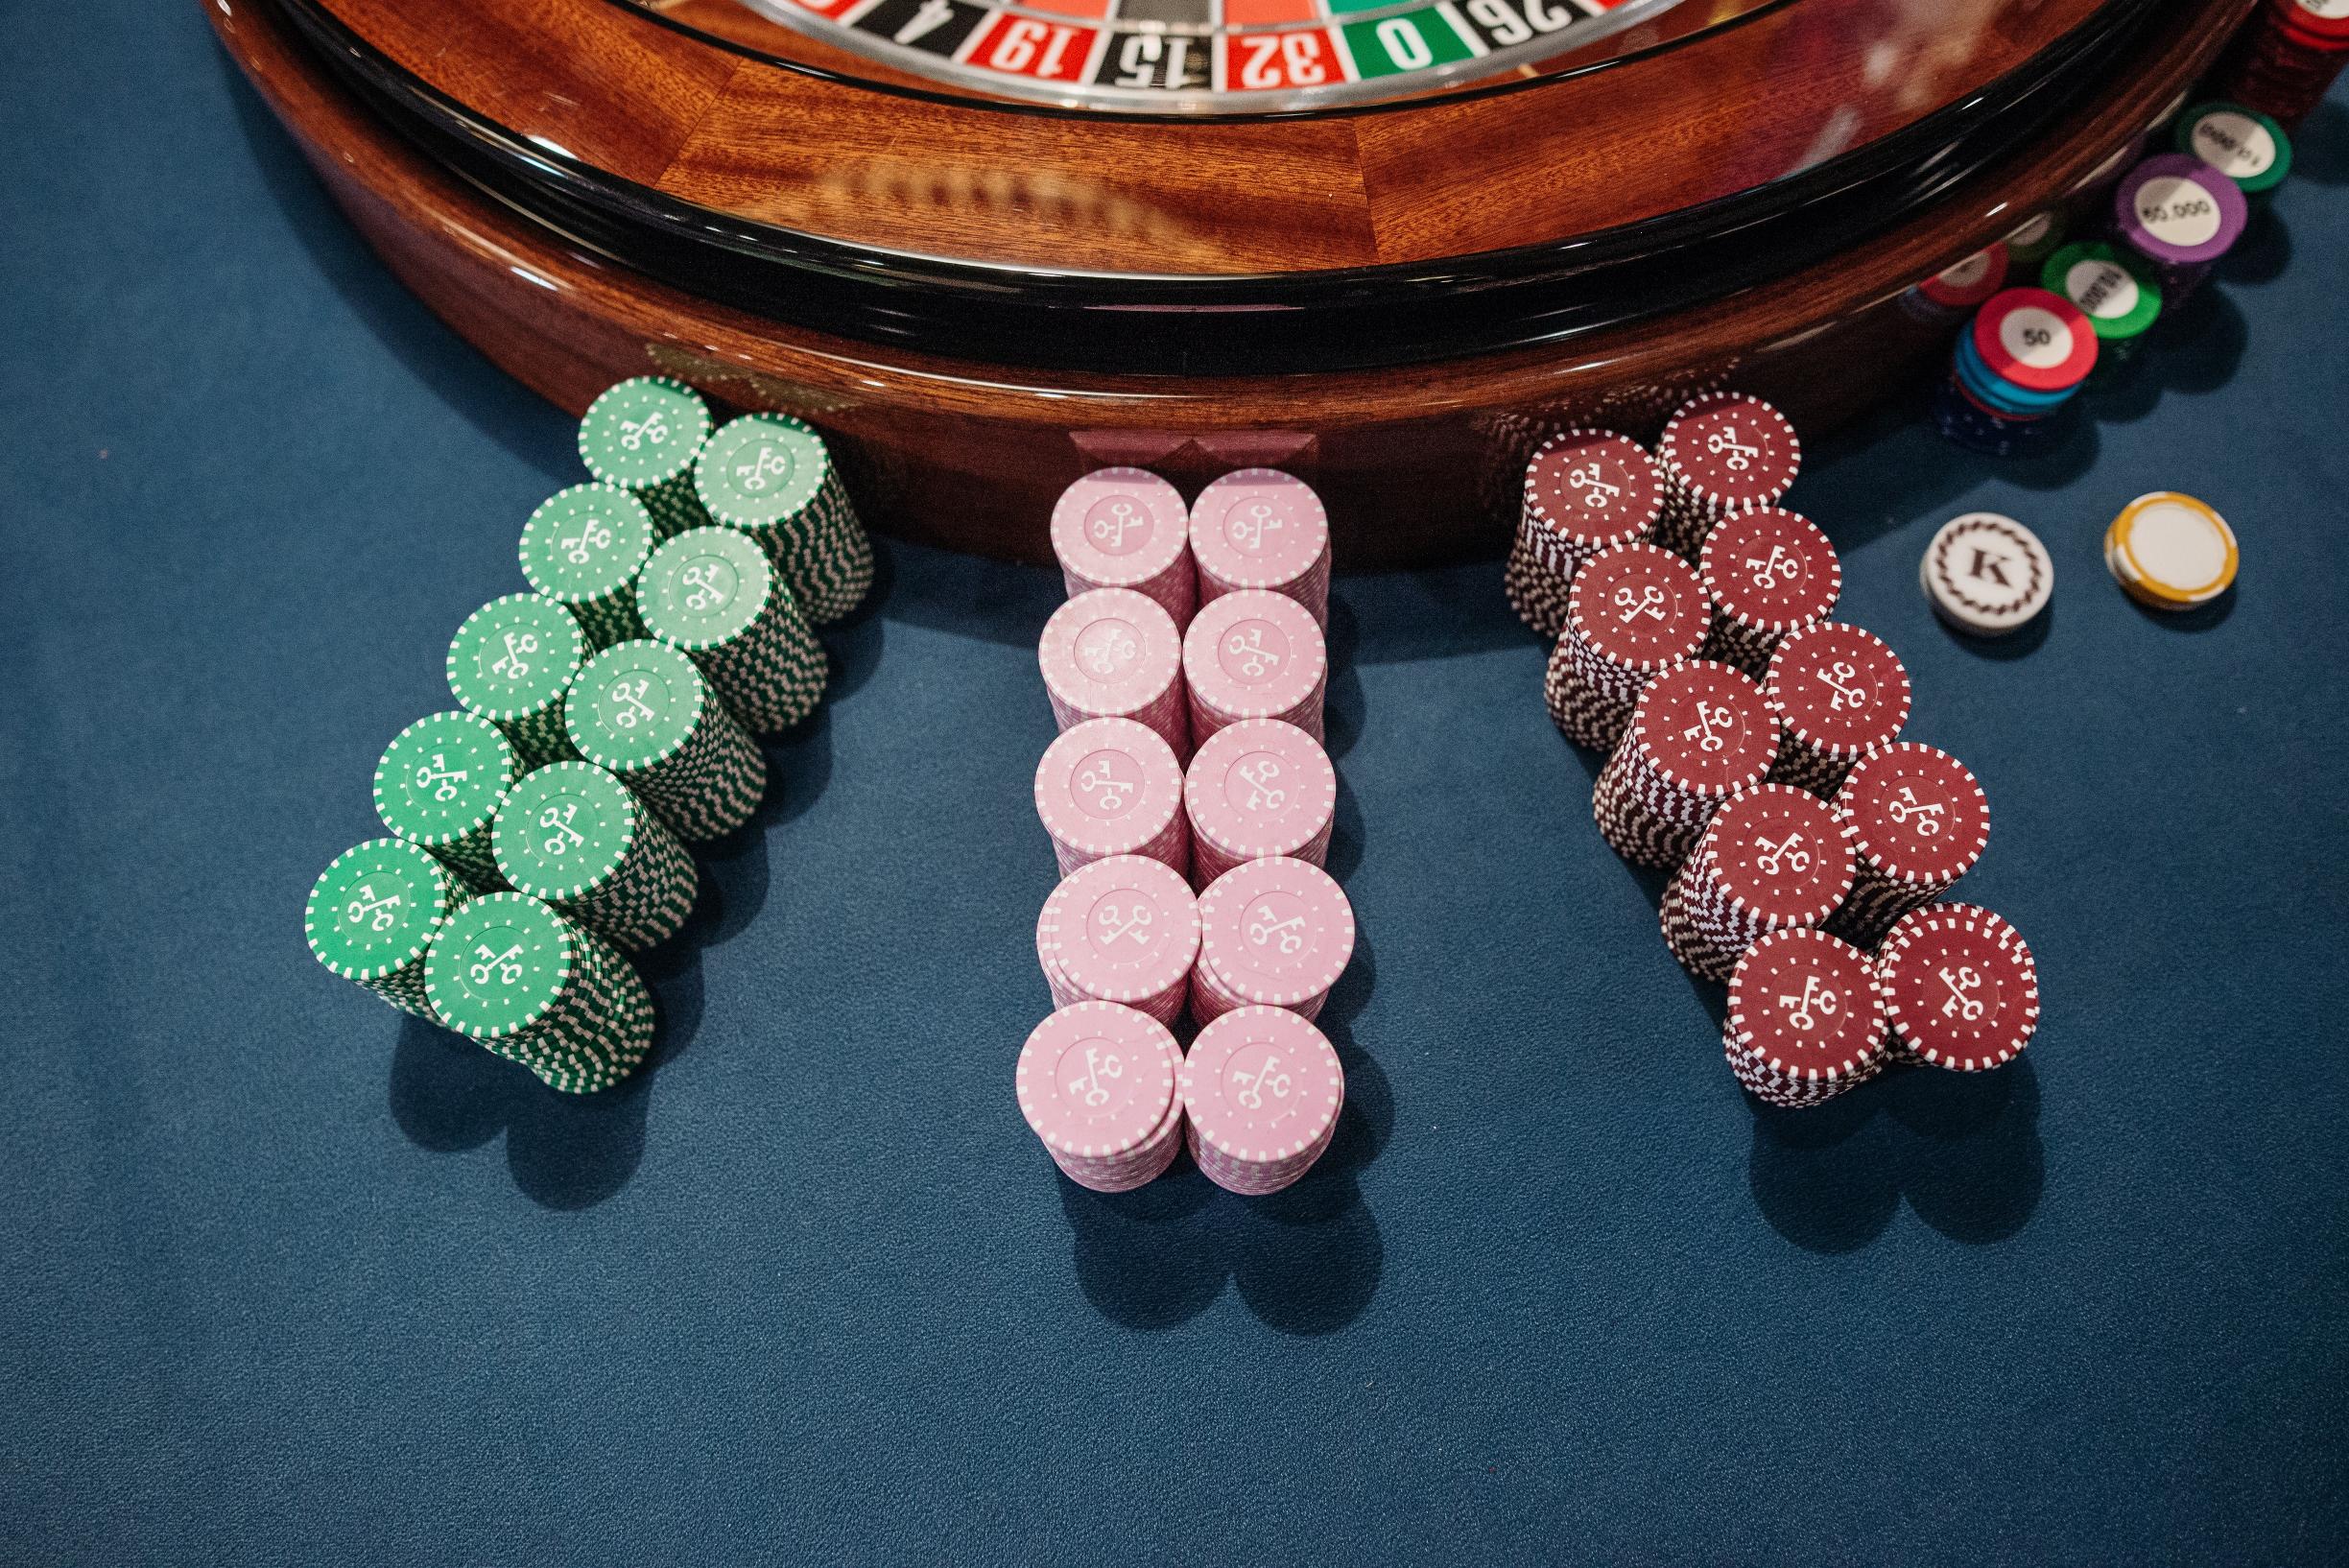 Blackjack Variations: Exploring Different Types of the Classic Casino Game